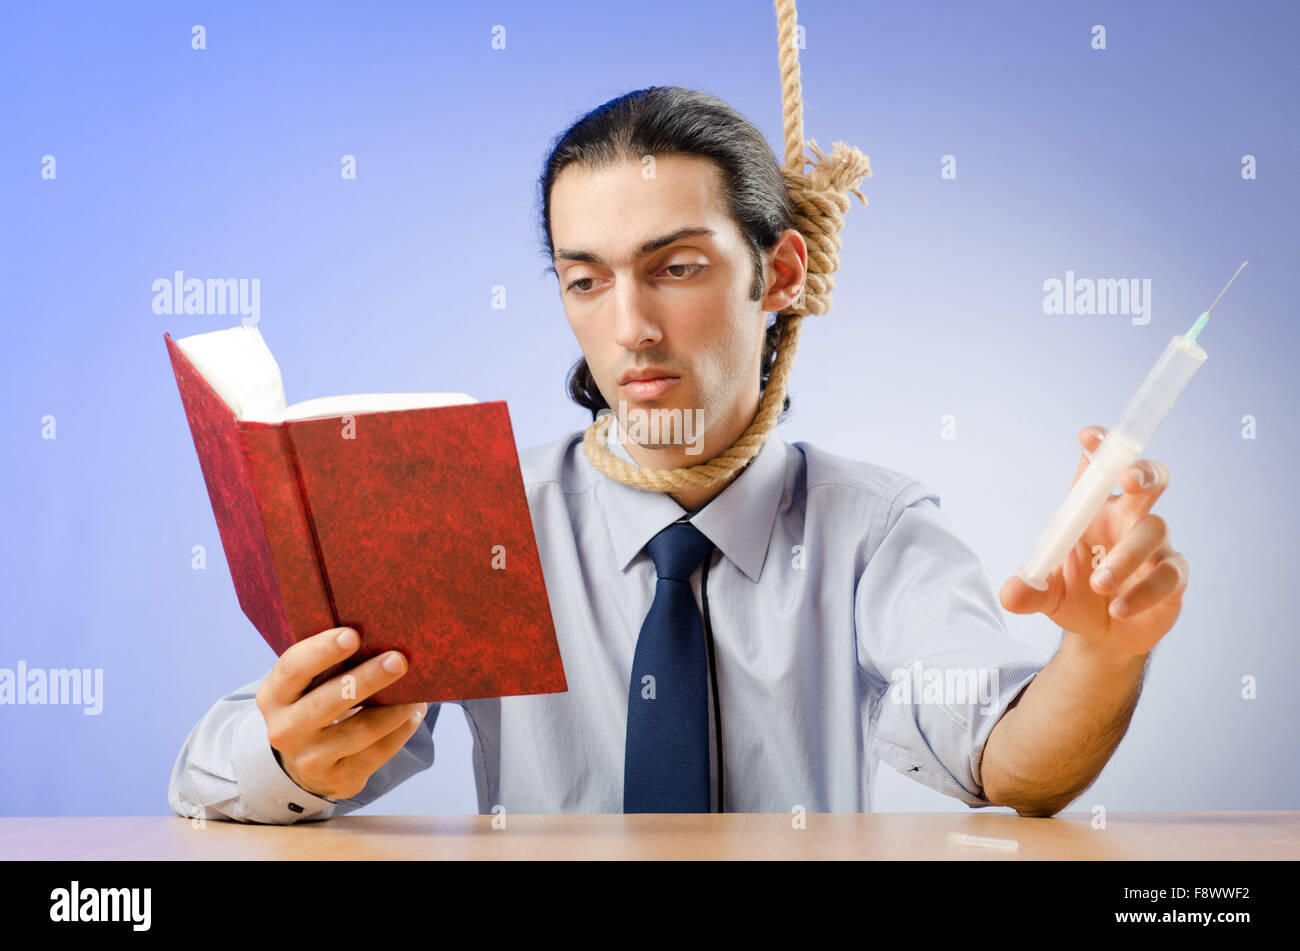 Suicide Youth Hanging Man Stock Photos & Suicide Youth Hanging Man ...